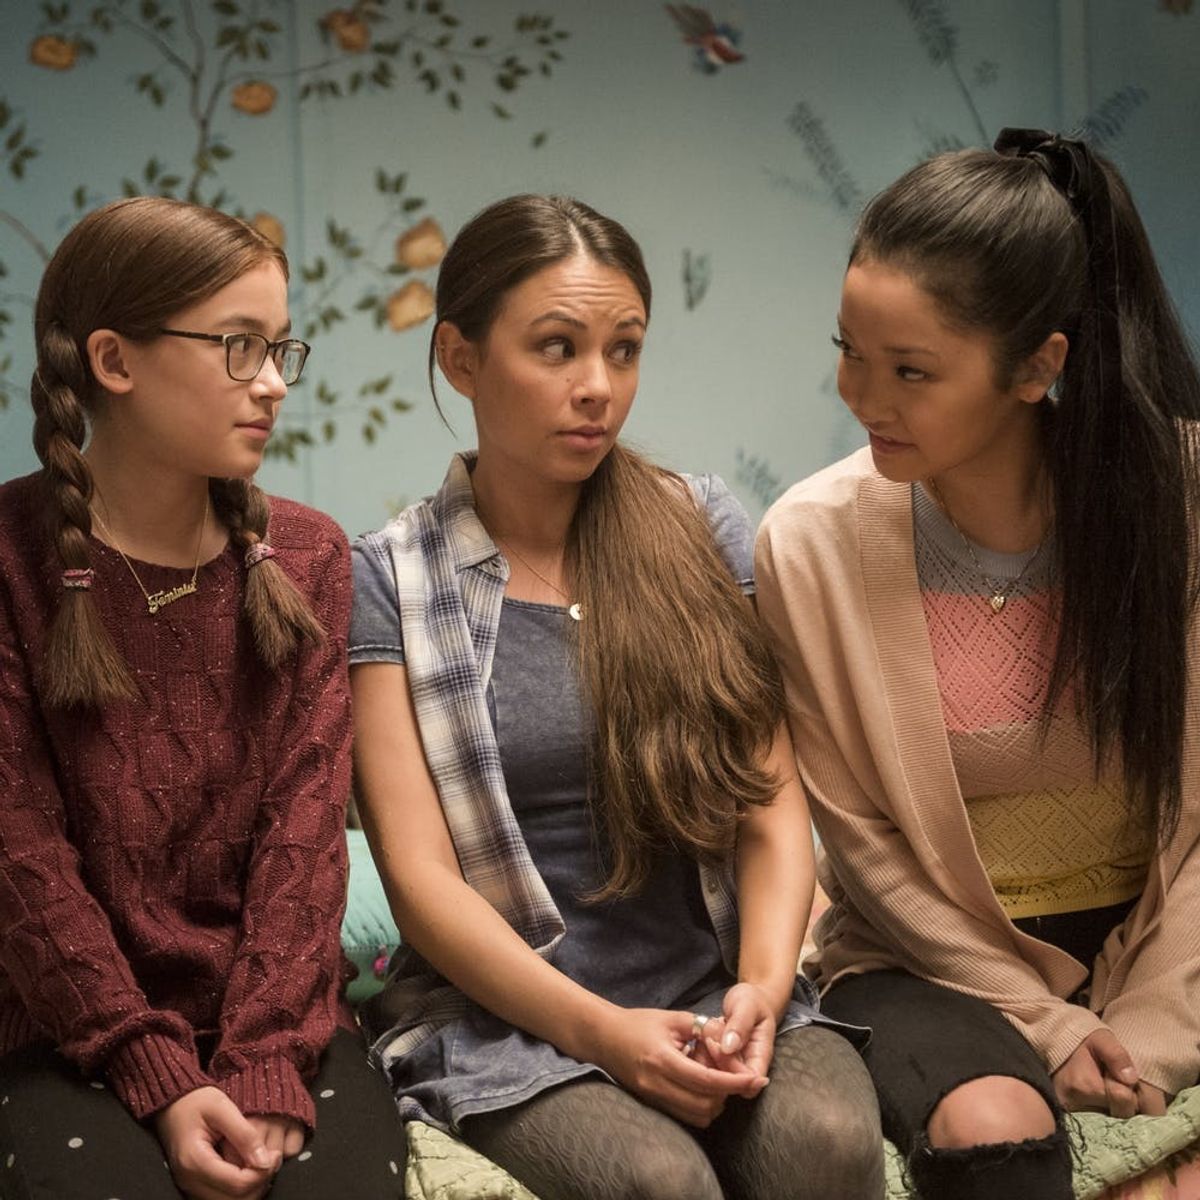 Peter Kavinsky Is Great, But the Covey Sisters Are the Real Crushes in ‘To All The Boys I’ve Loved Before’